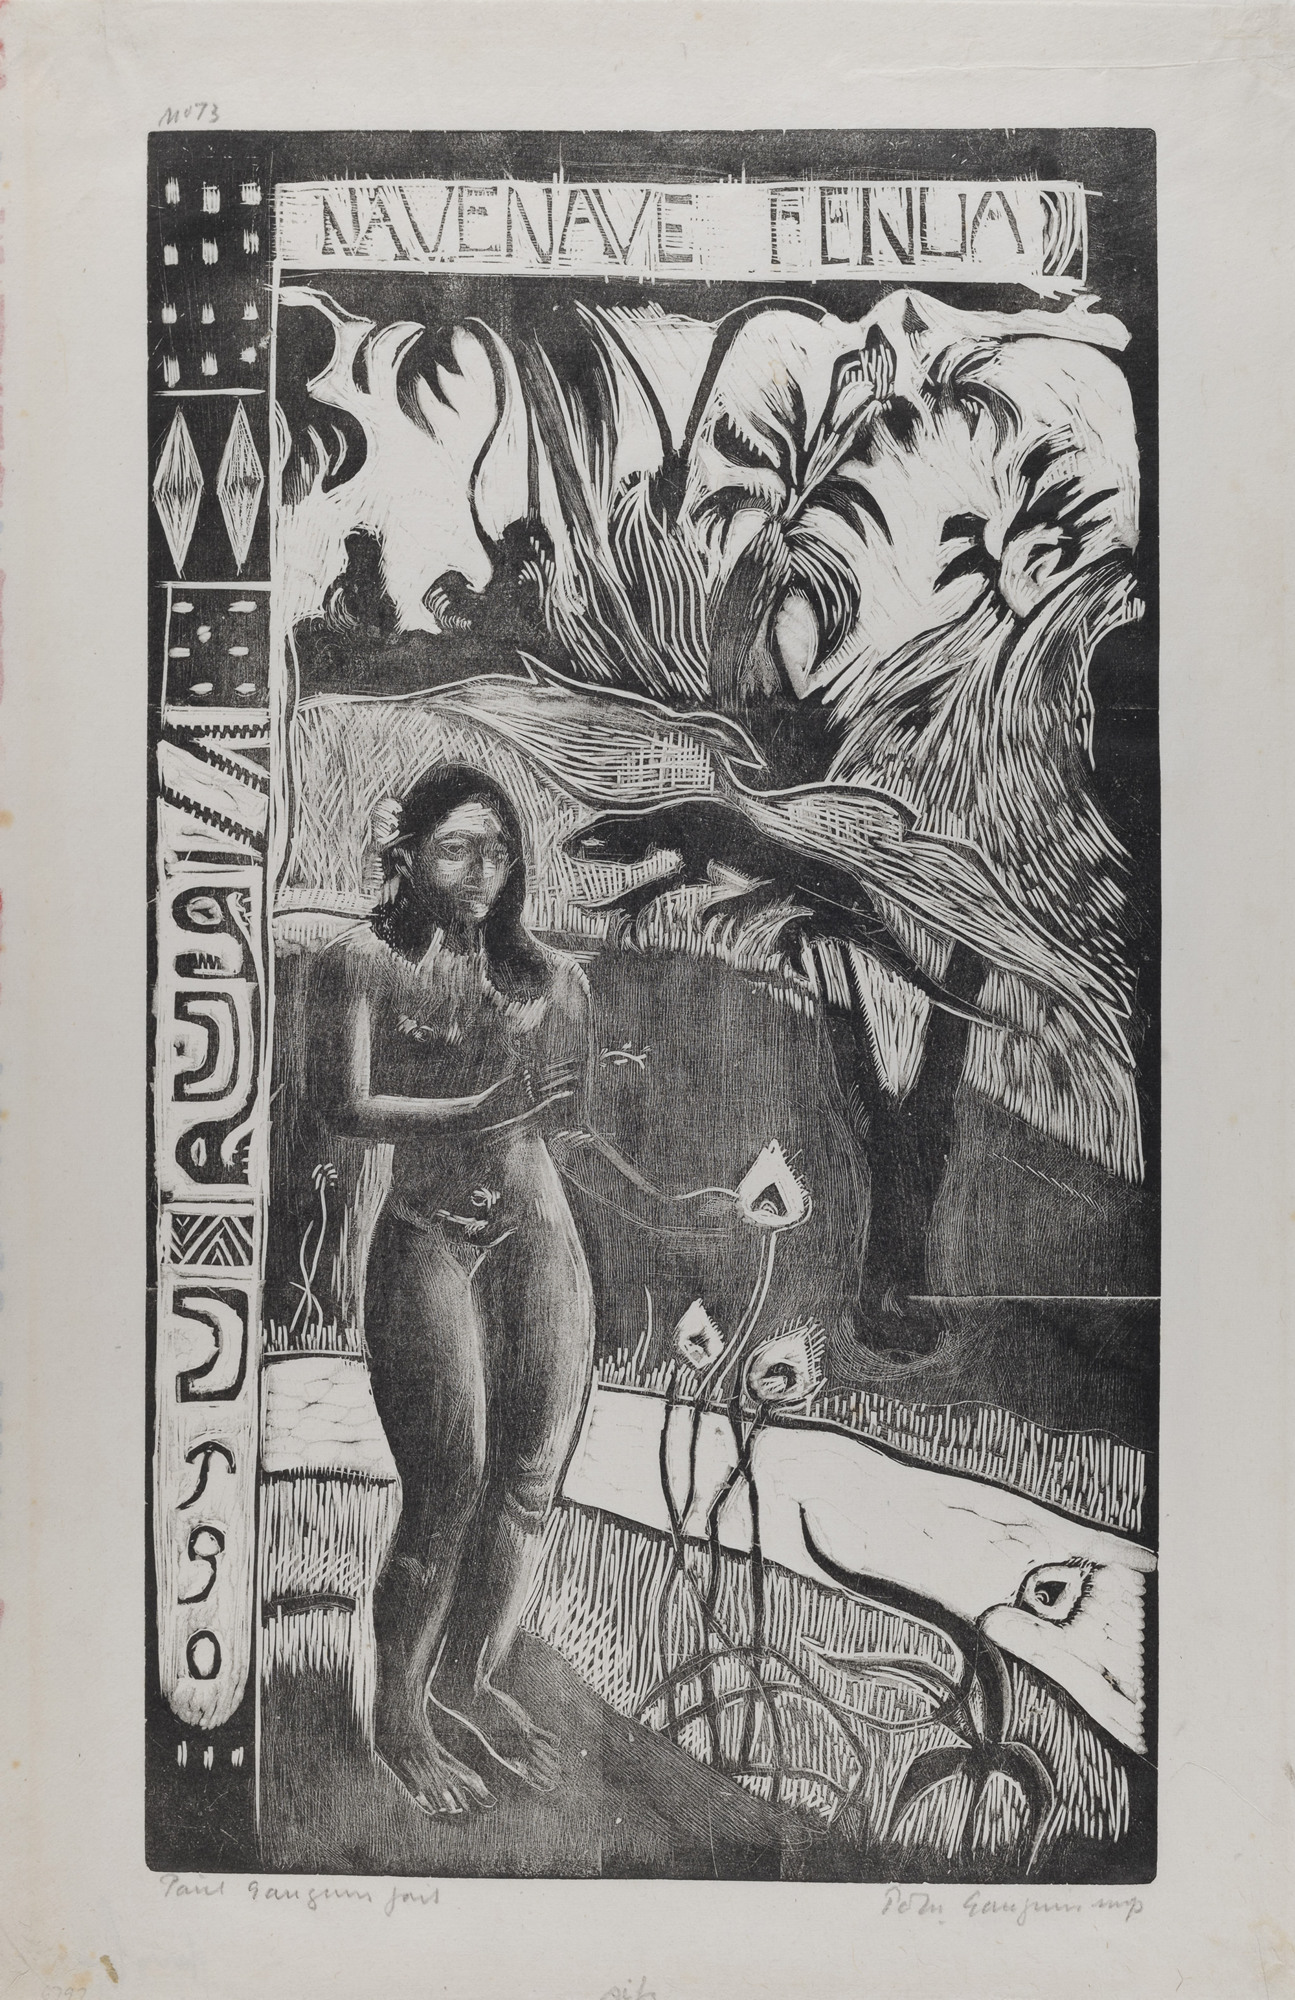 “Nave Nave Fenua” (“Fragrant Isle”) from the suite “Noa Noa” (“Fragrant Scent”) by Paul Gauguin is one of the prints on display. Image courtesy The Israel Museum, Jerusalem, Elie Posner